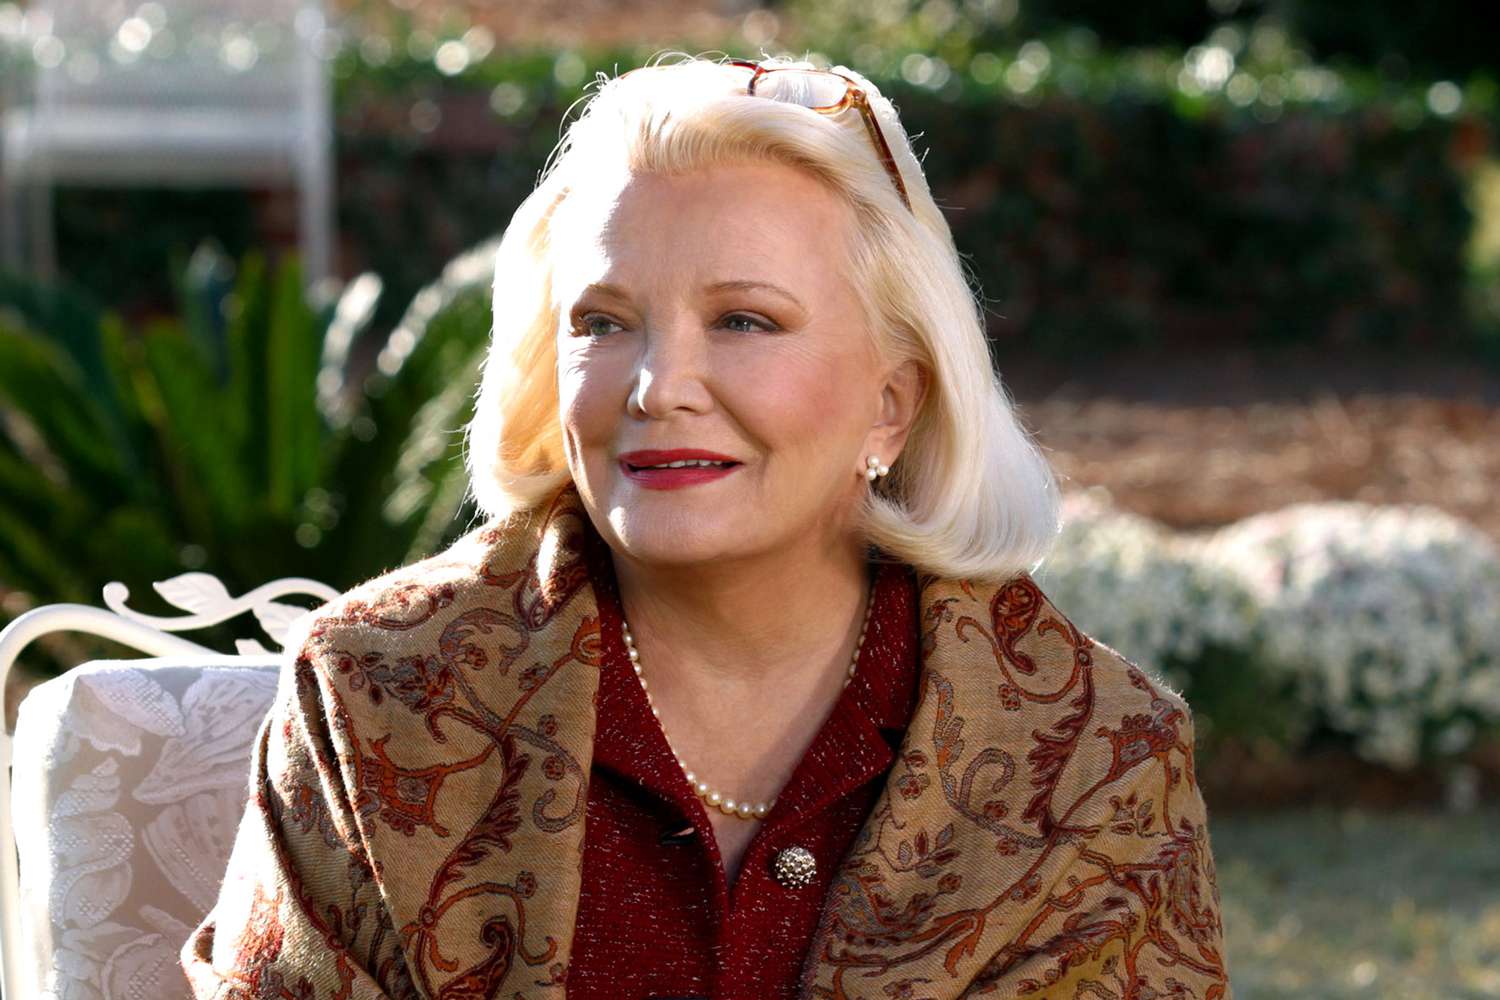 Just like her character in 'The Notebook', Gena Rowlands has Alzheimer's